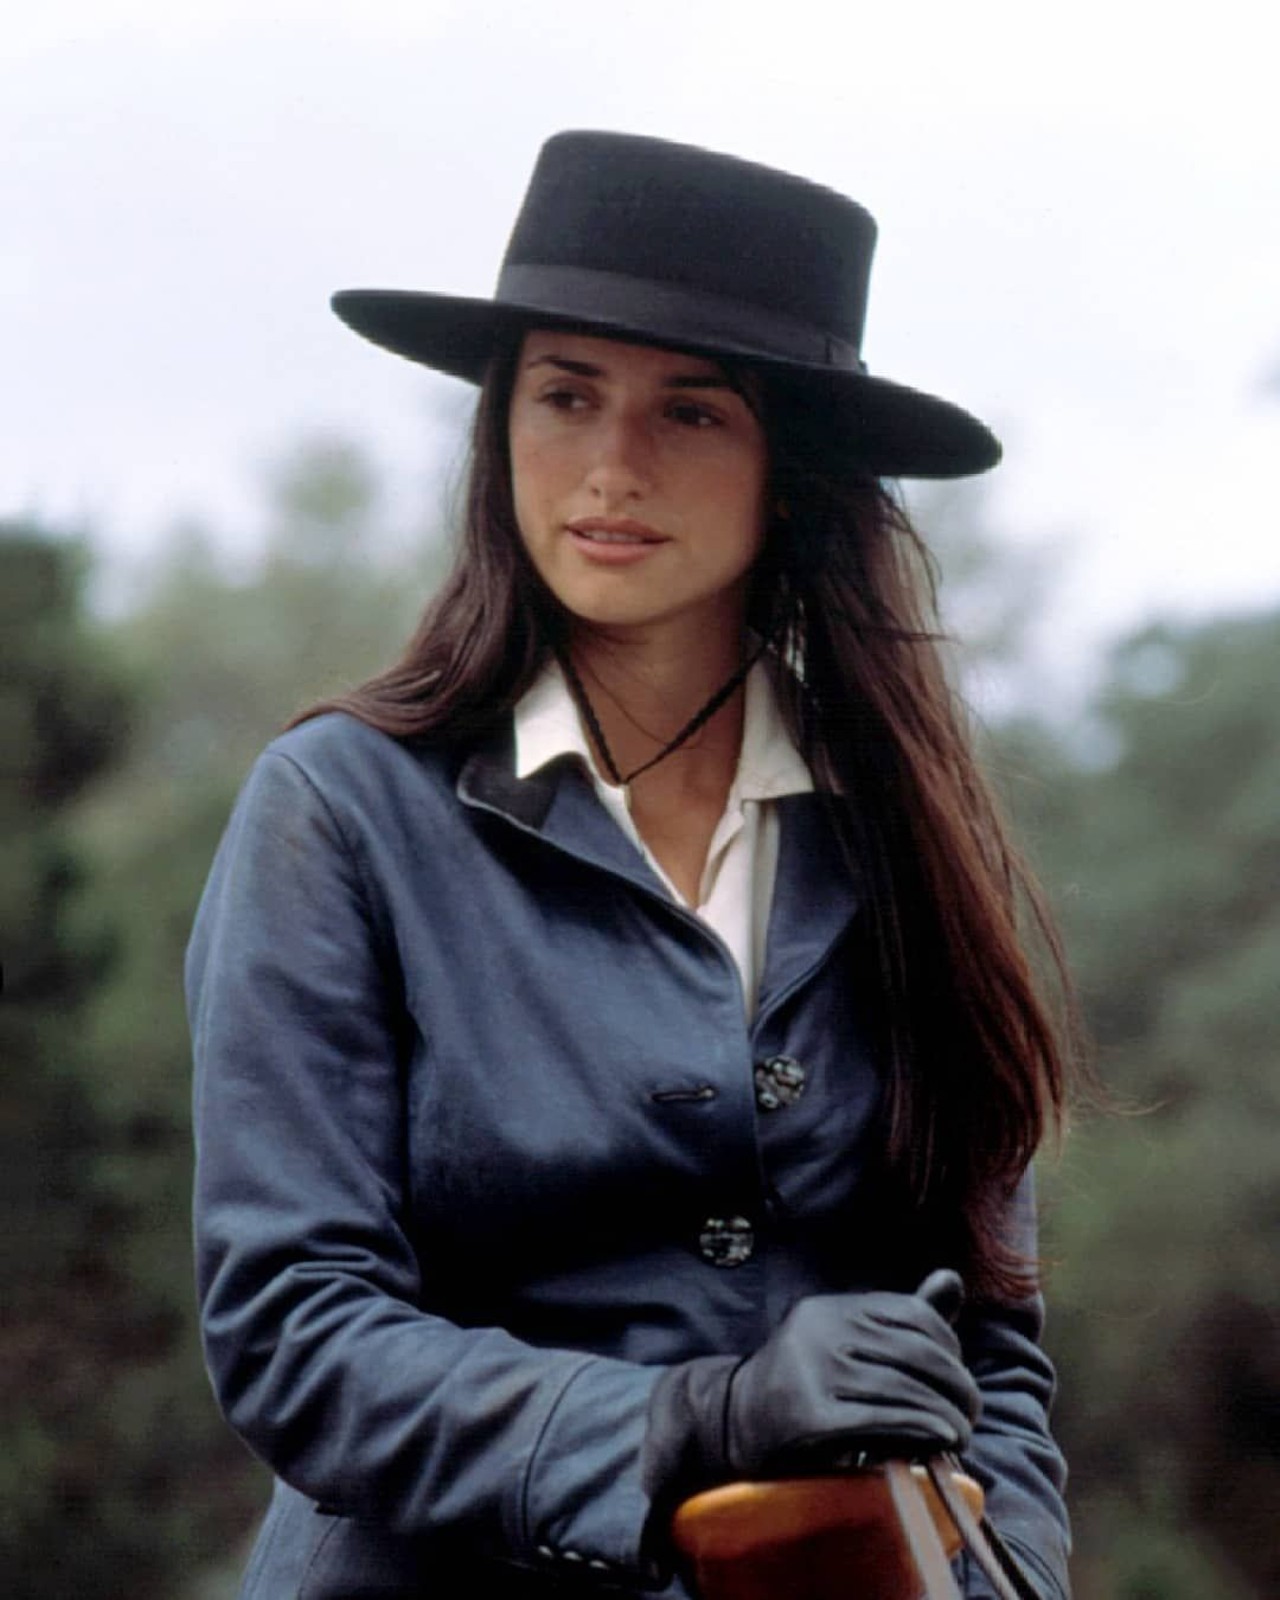 Penelope Cruz – All the Pretty Horses
Cruz plays Alejandra Villarreal, the daughter of a wealthy rancher who Matt Damon’s character John Cole falls in love with, much to the displeasure of her family. 
Photo via Columbia Pictures